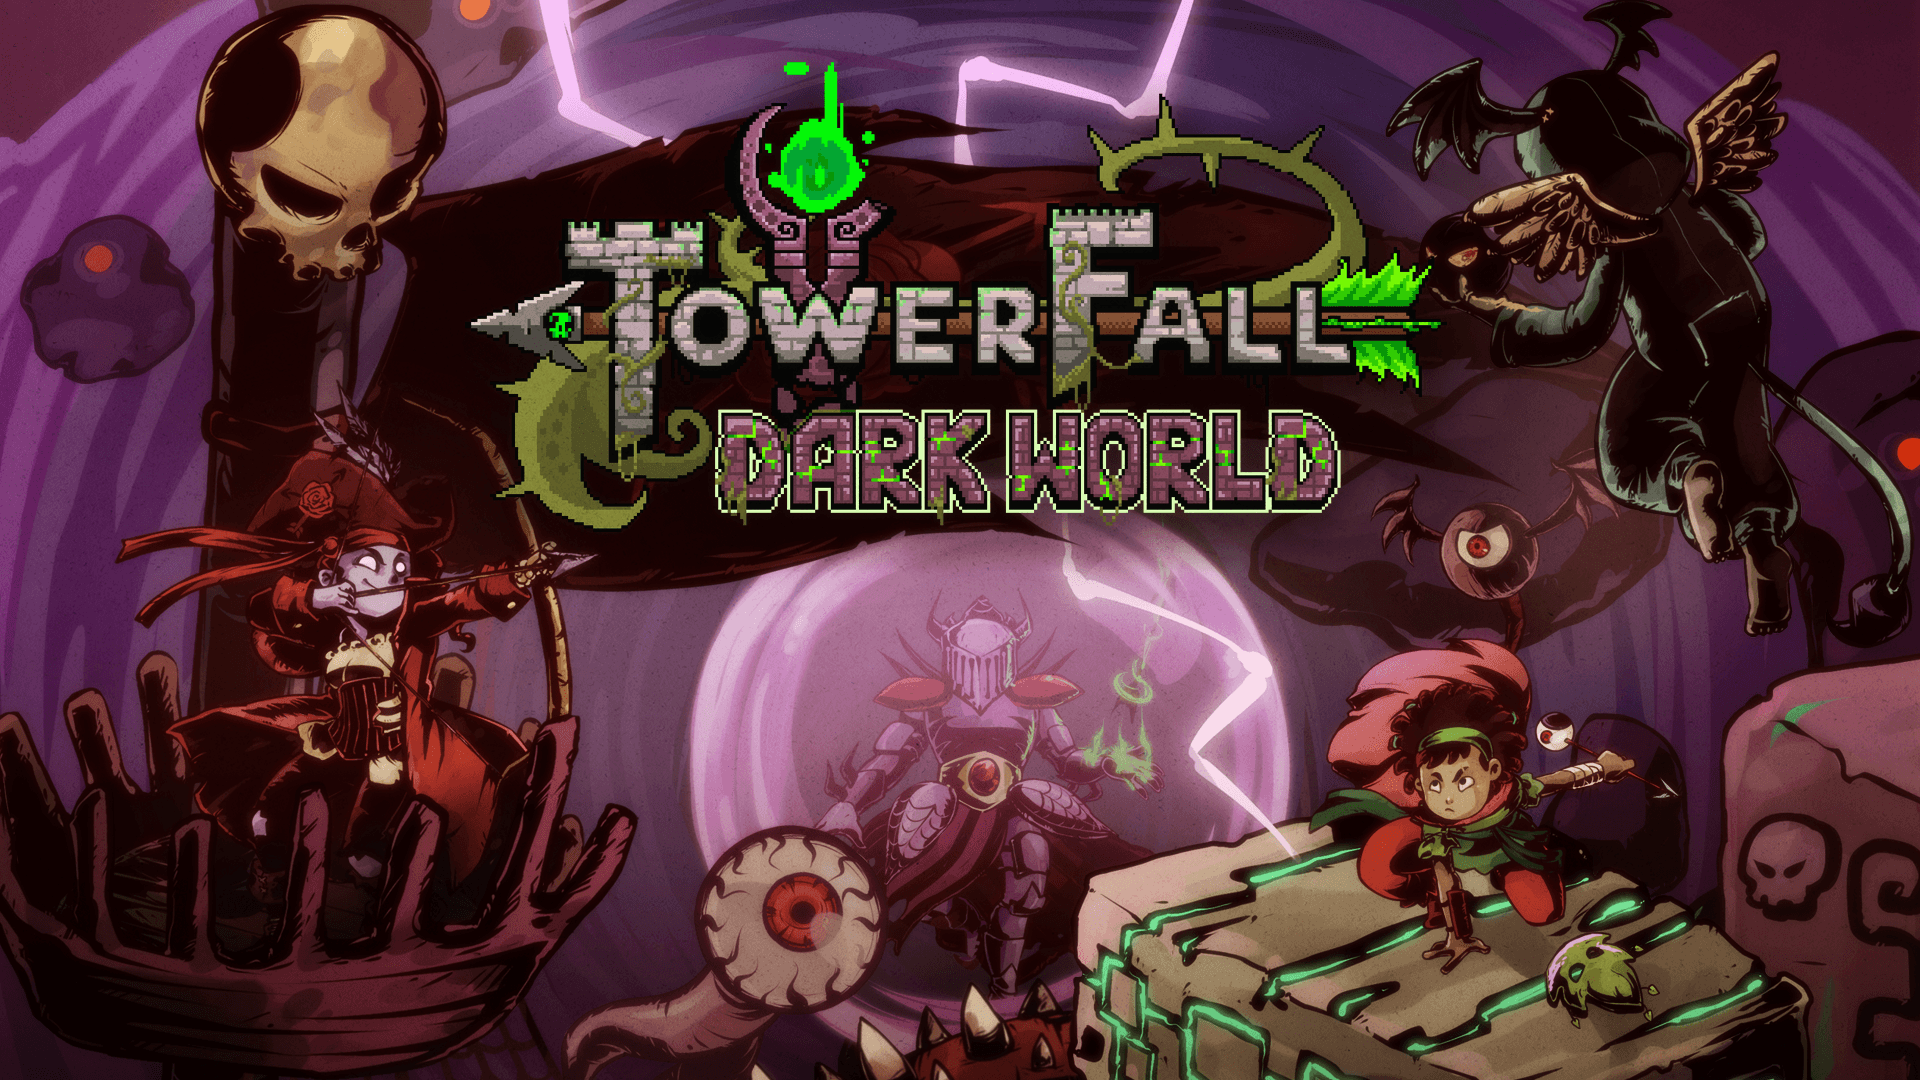 TowerFall: Ascension (2014) promotional art